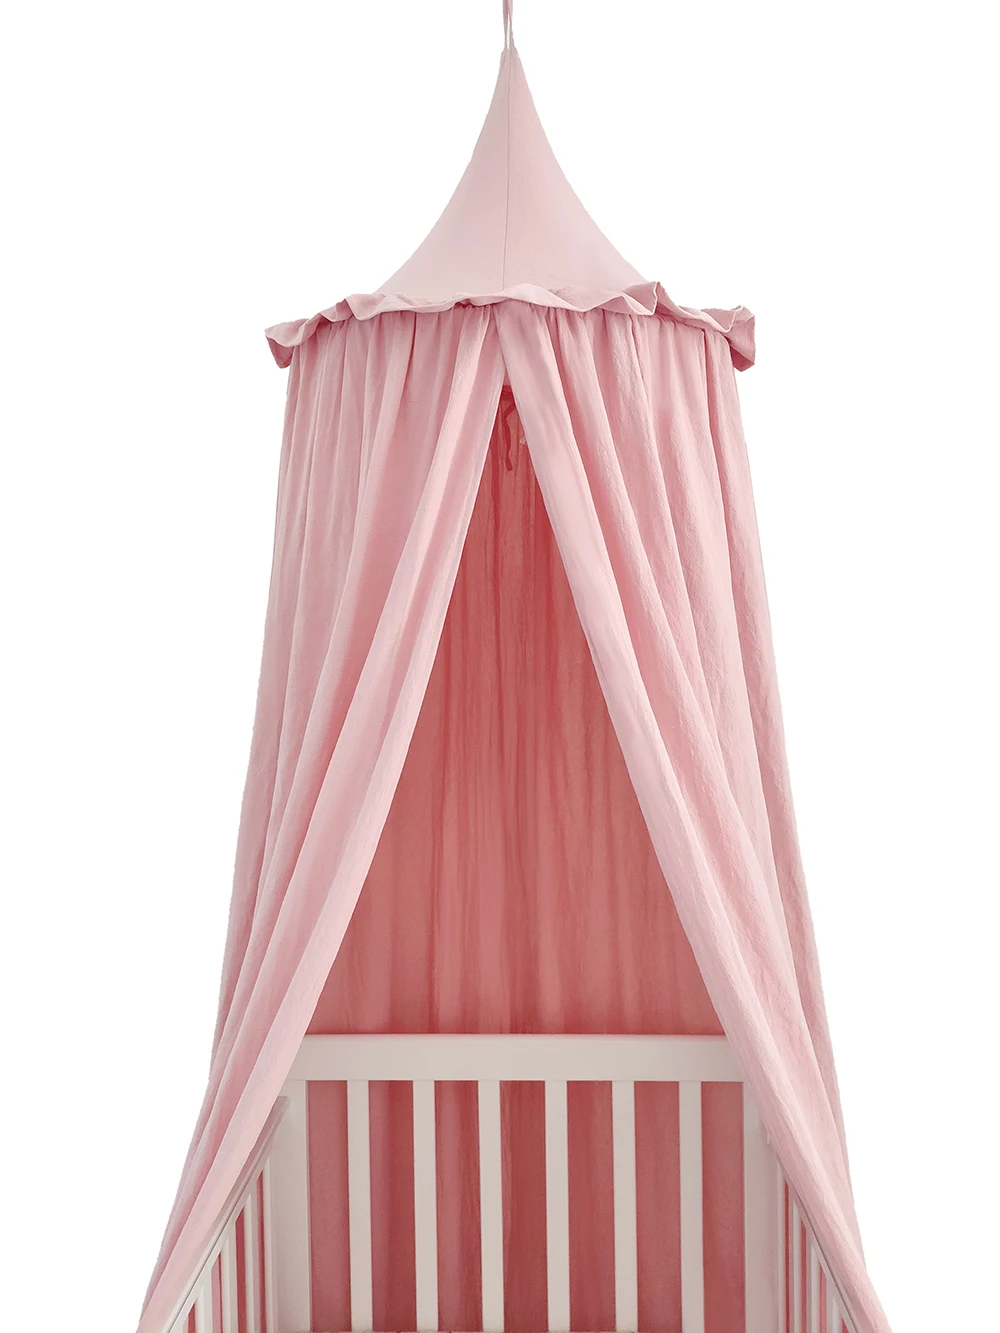 100%  Cotton Crib Kids Room Deco Baldachin with Frill Bed Curtain Canopy for Nursery